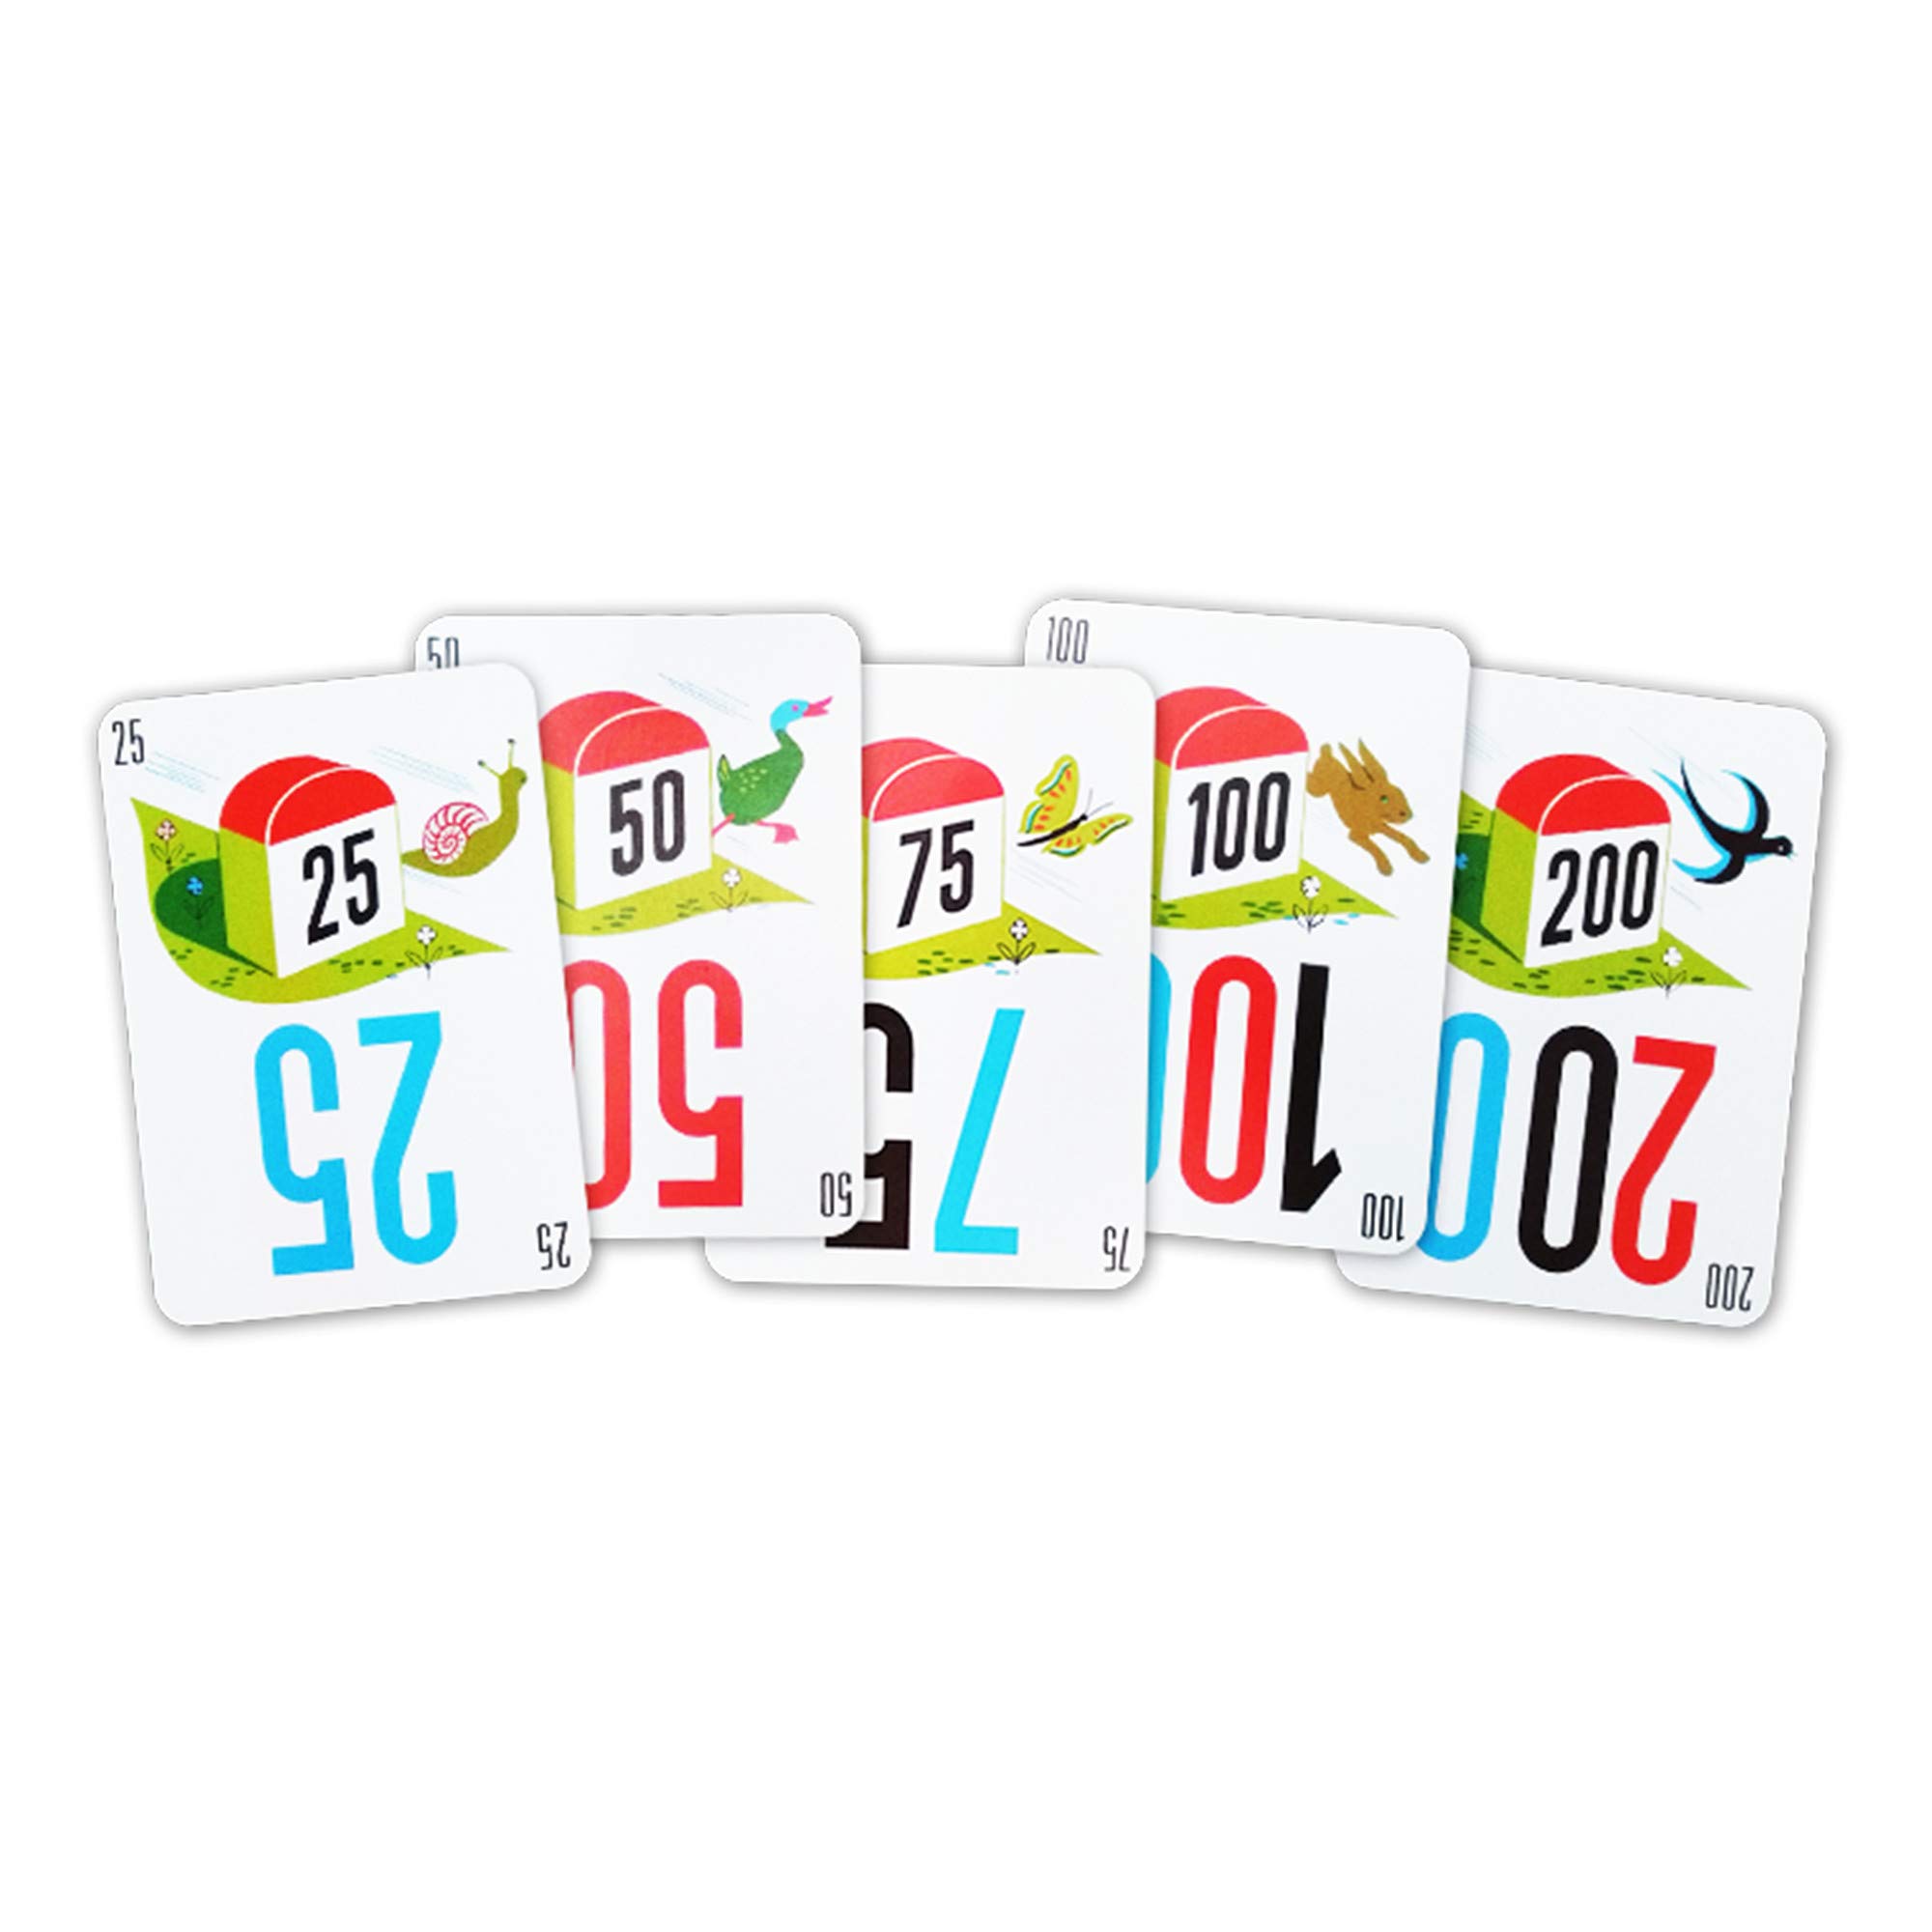 Mille Bornes The Classic Racing Game | Fast-Paced Card | Strategy | Fun Family Game for Adults and Kids | Ages 7 and Up | 2-6 Players | Average Playtime 20 Minutes | Made by Zygomatic